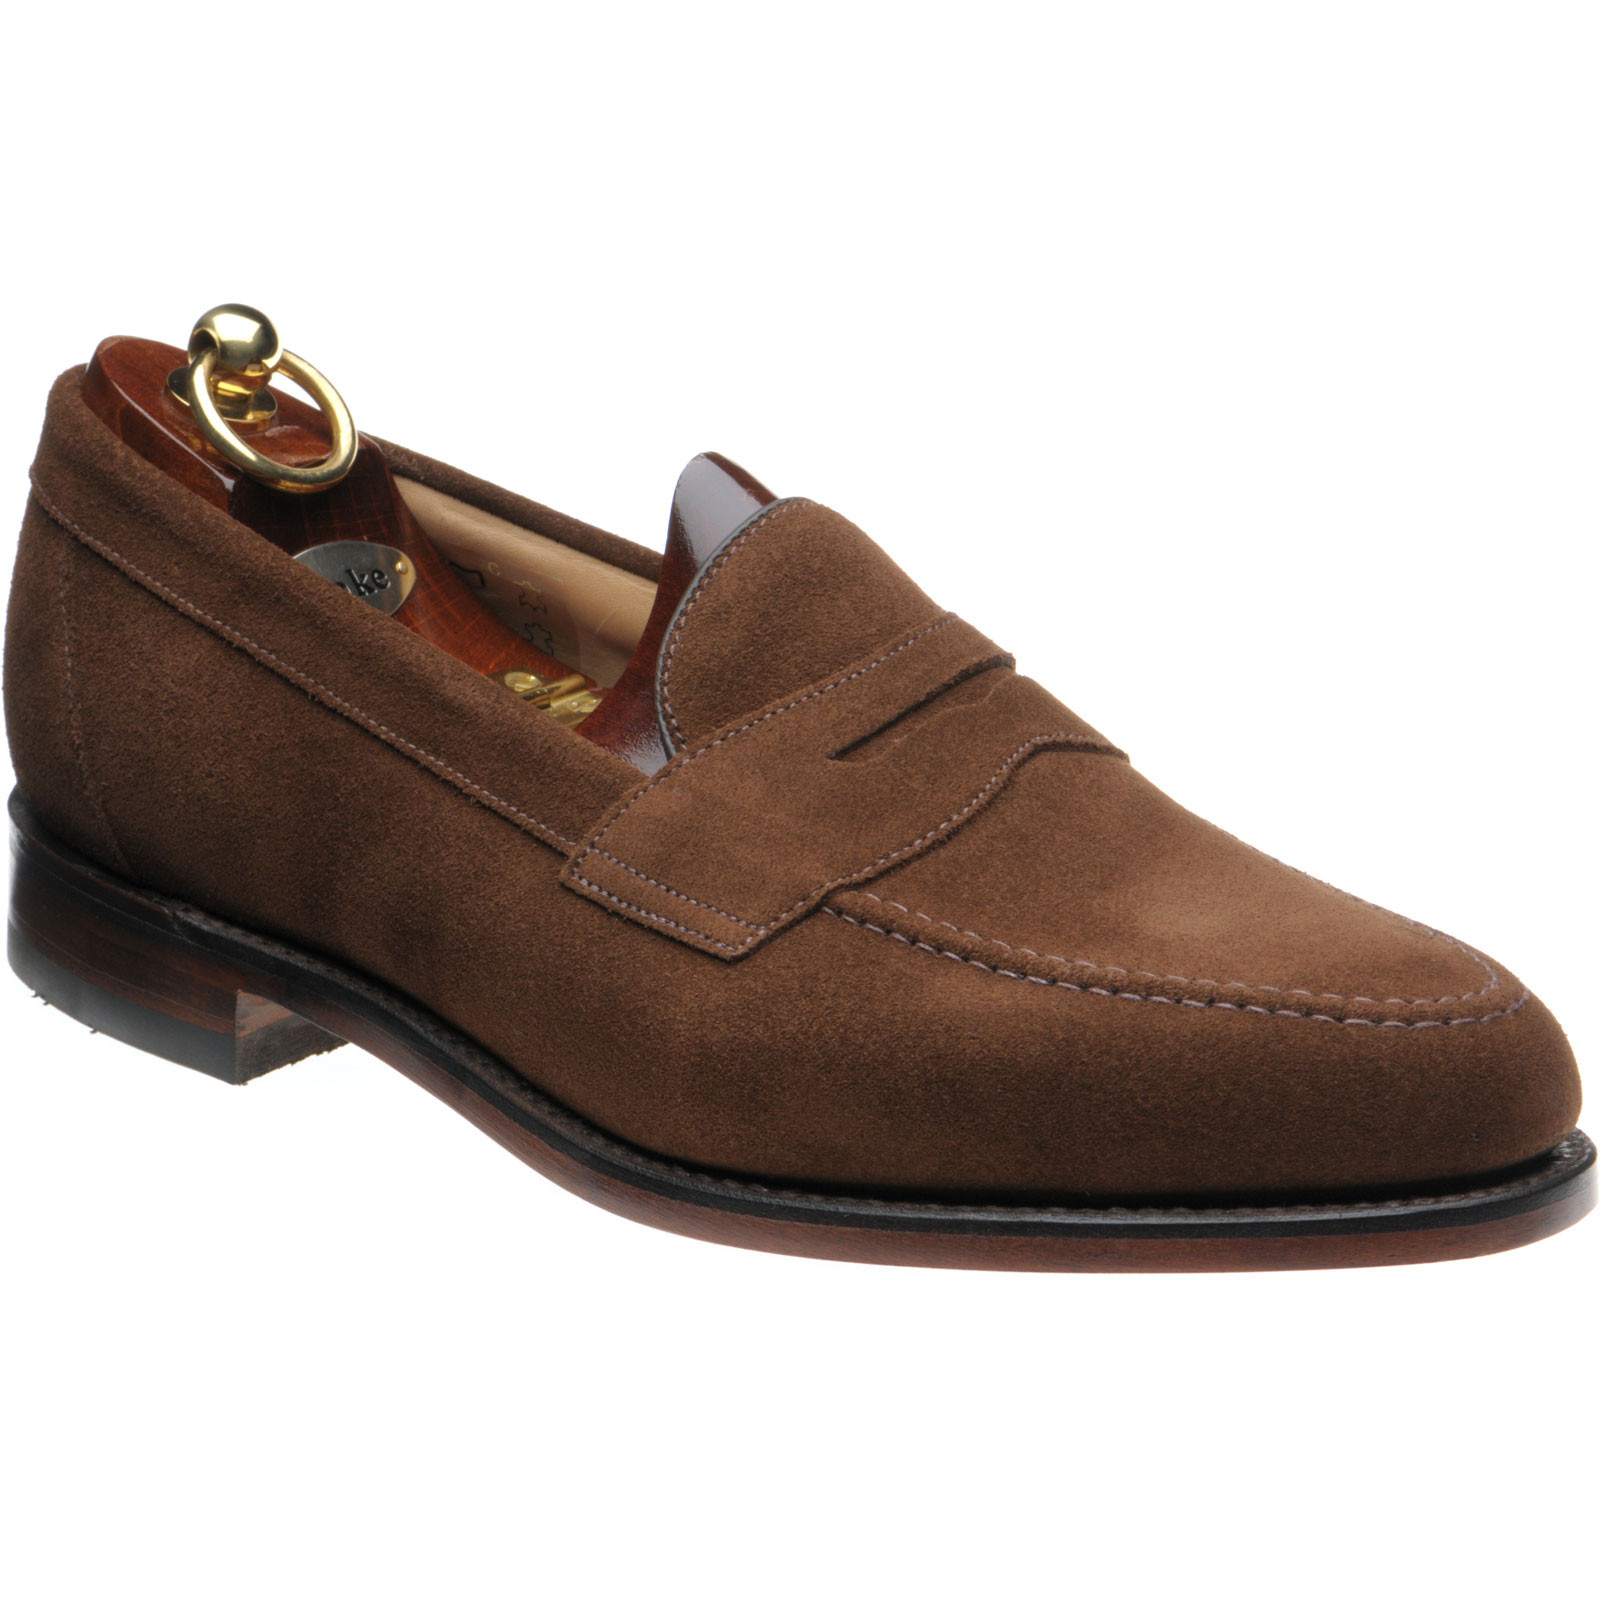 Loake shoes | Loake Professional | Imperial loafers in Brown Suede at ...